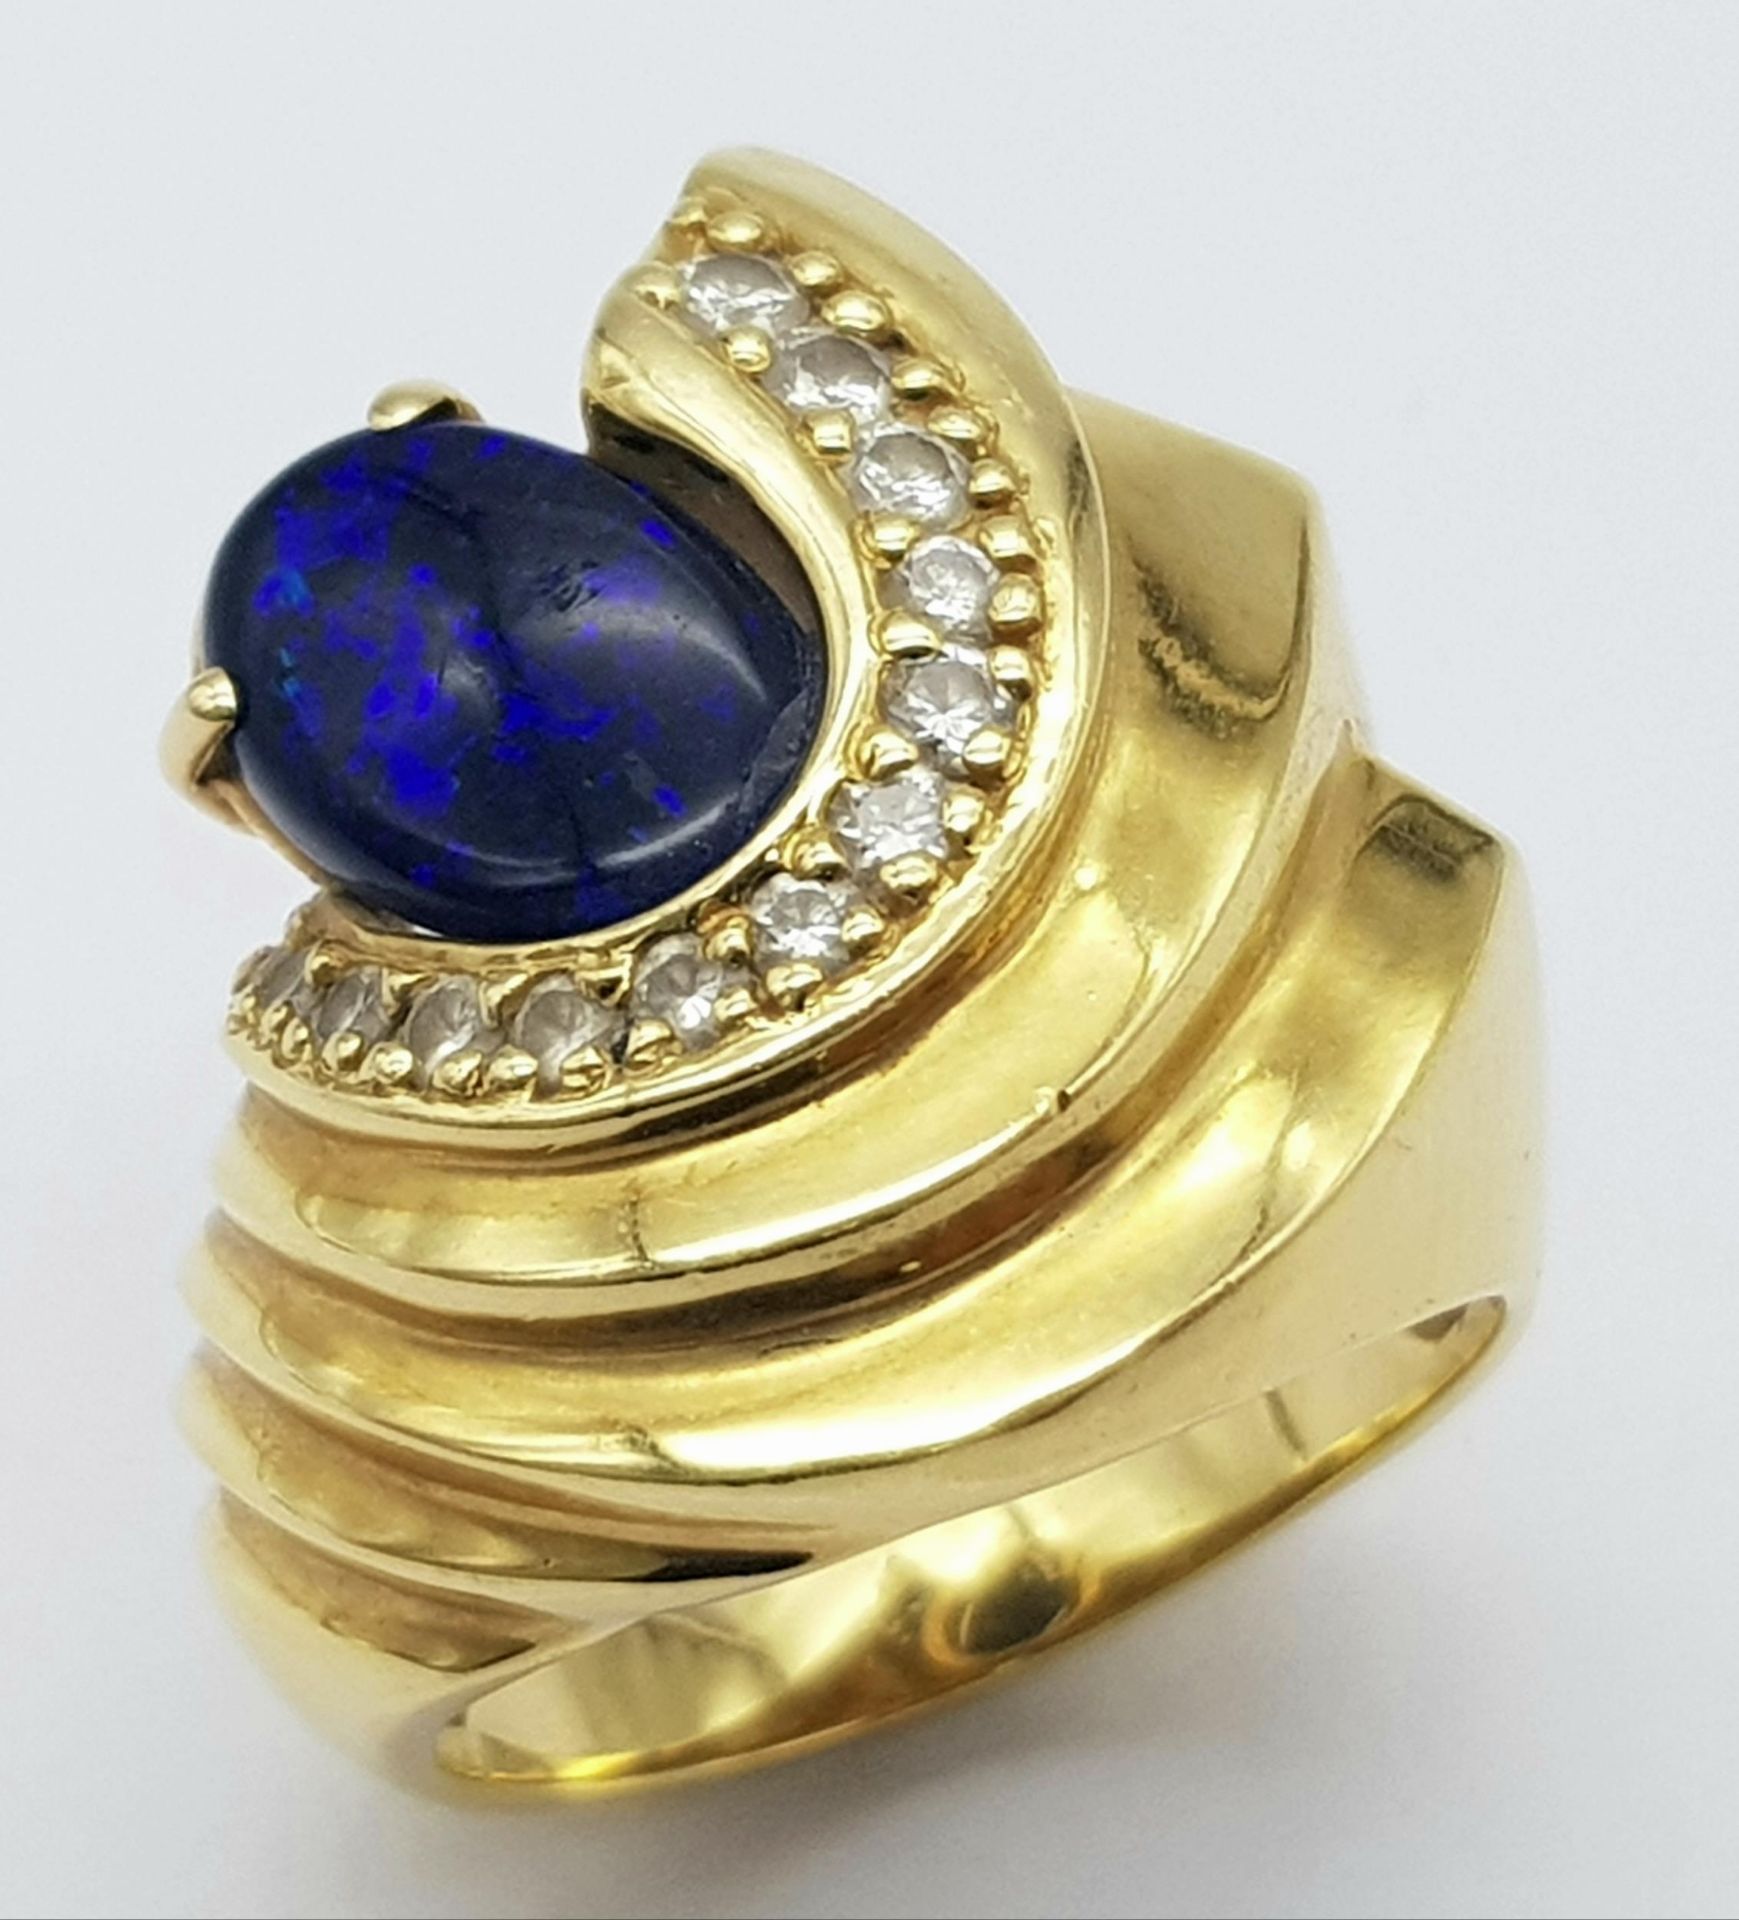 A Gorgeous 18K Yellow Gold (tested) Australian Black Opal and Diamond Ring. An enticing oval cut